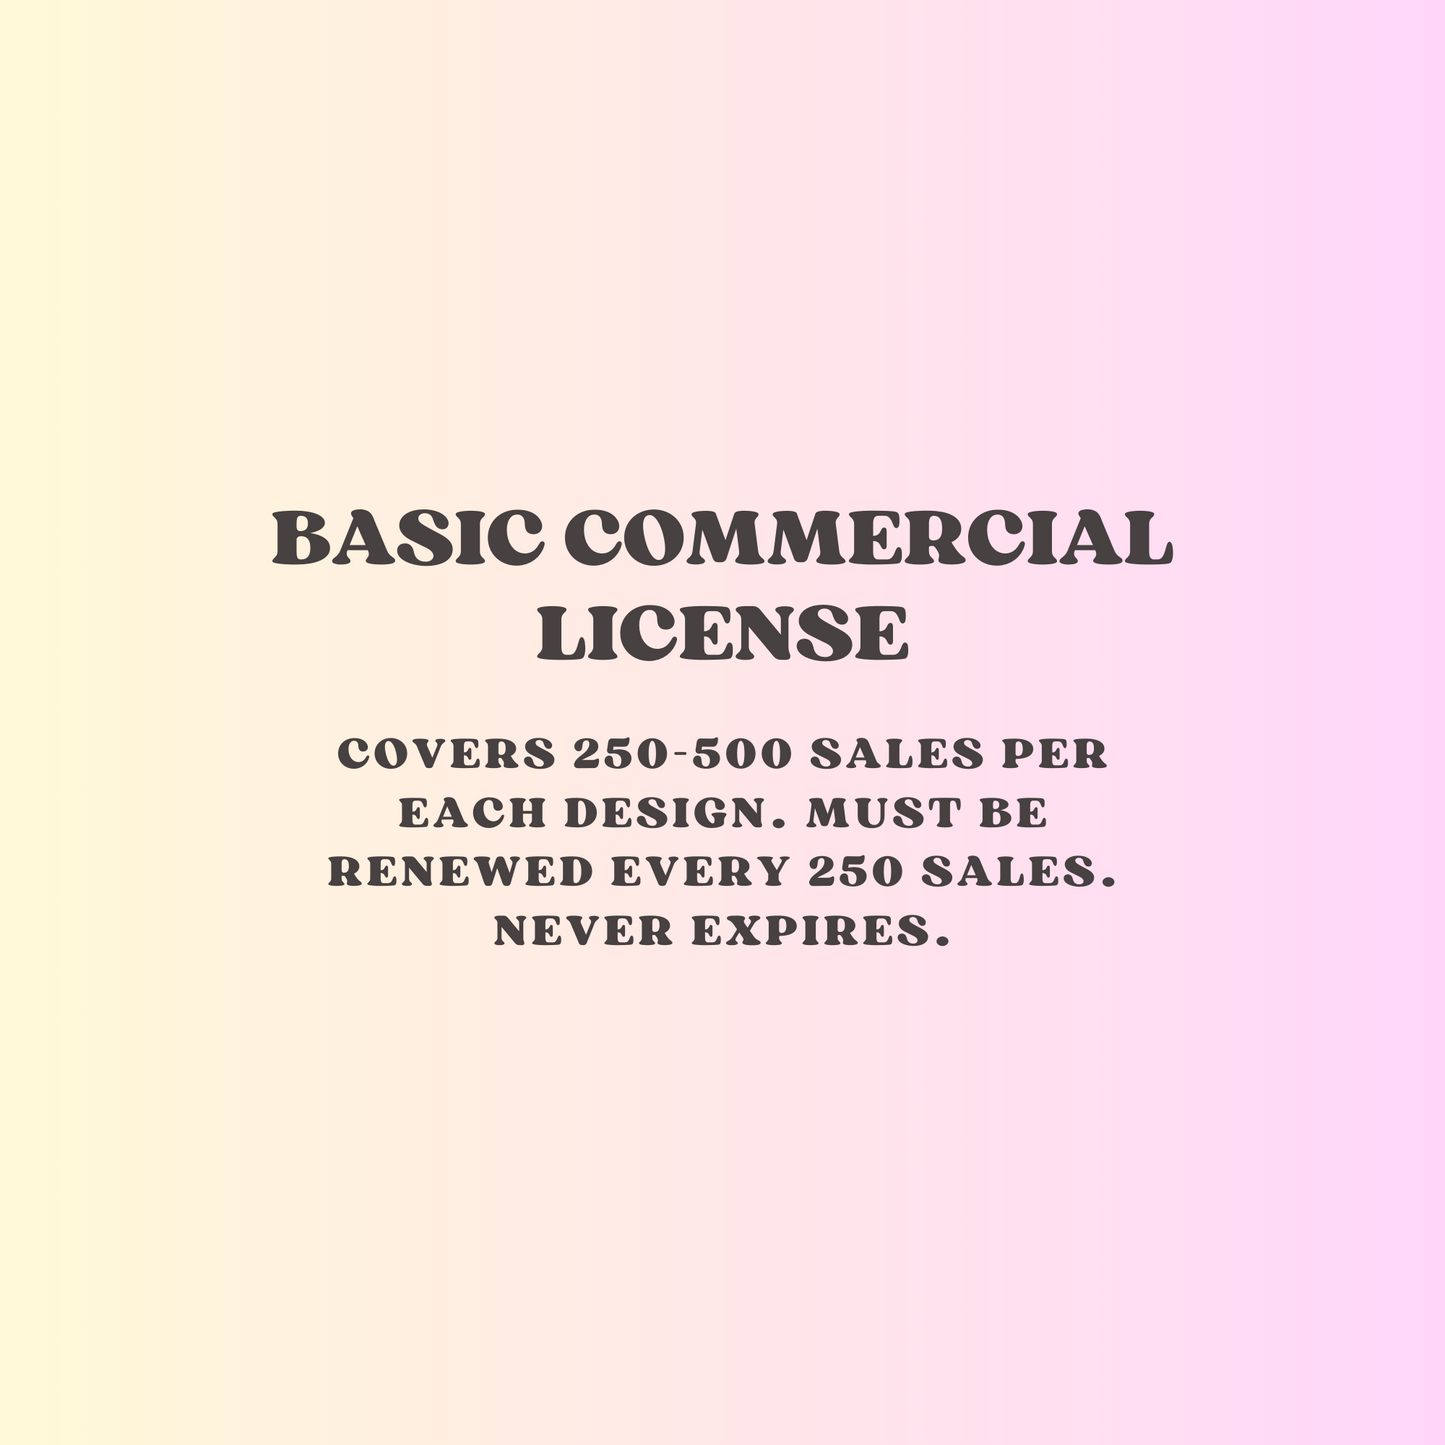 Commercial license